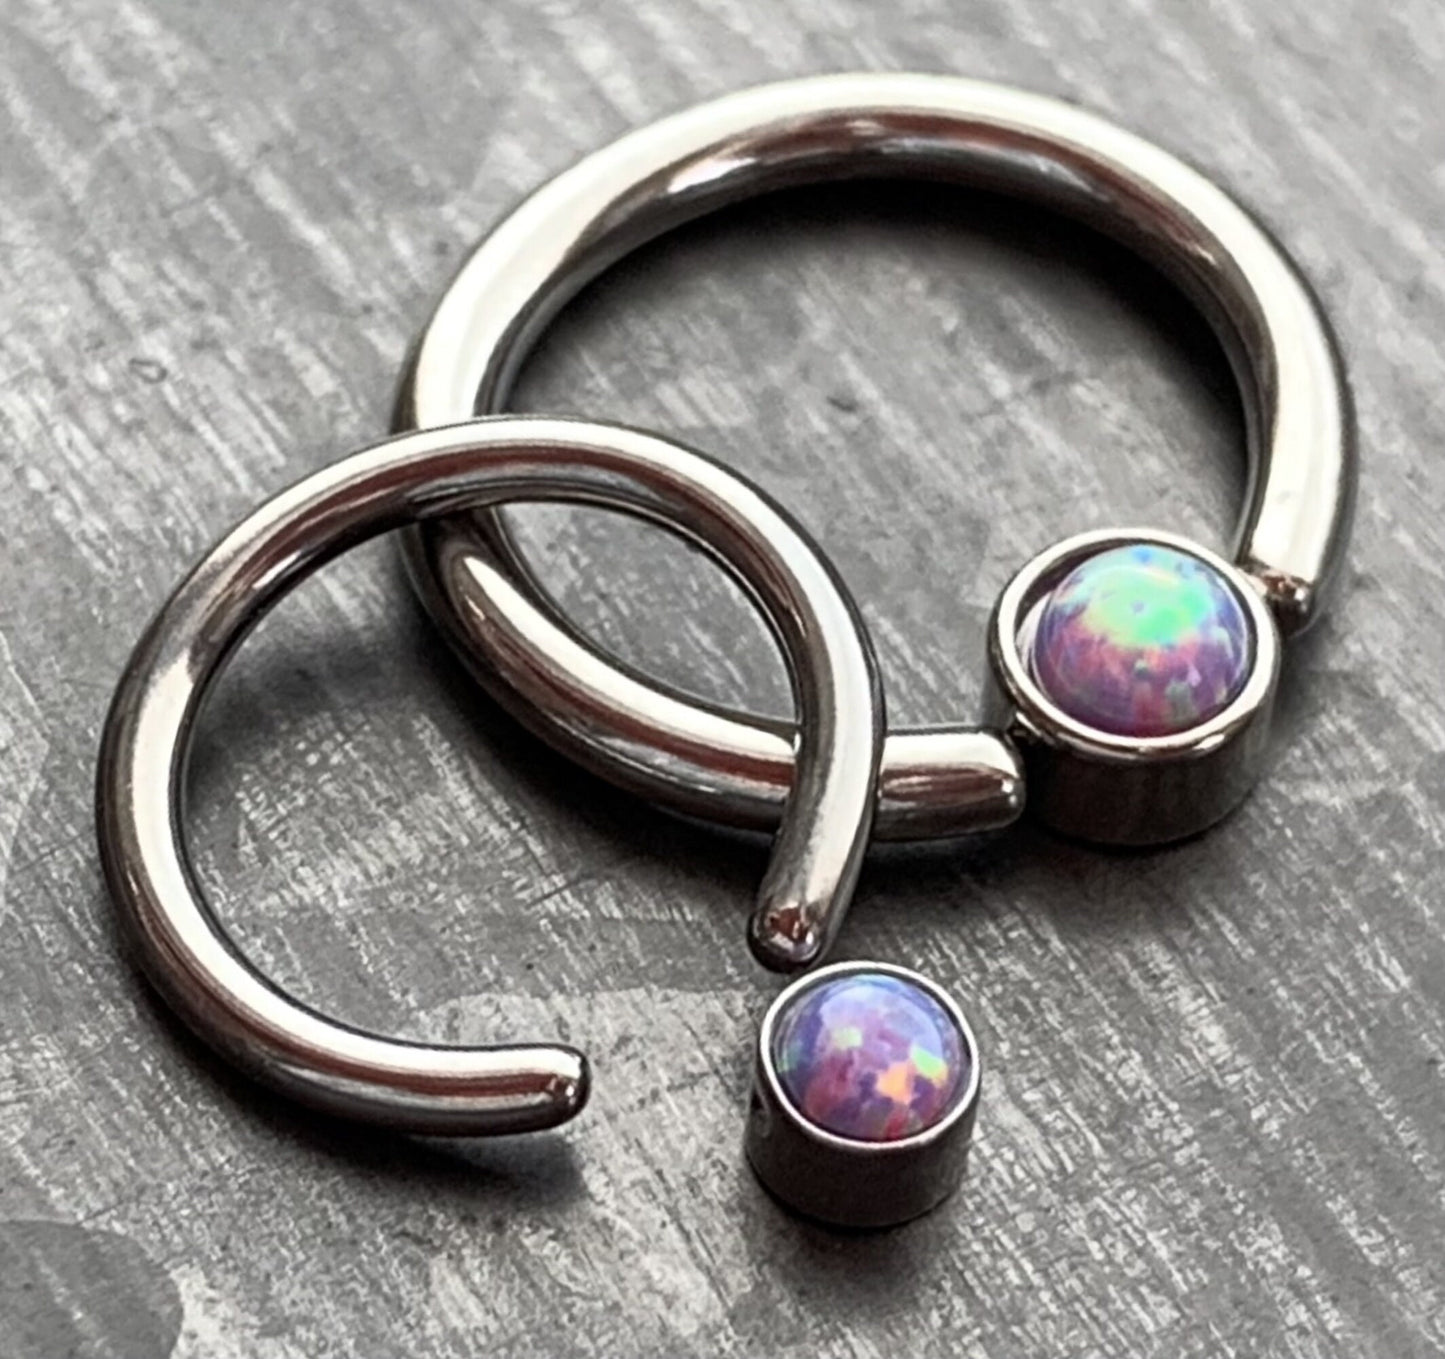 1 Piece of Opal Set Flat-Back Captive Bead Septum Ring - 16g or 14g - 8mm or 10mm - White, Purple, Blue, Pink or Green Available!